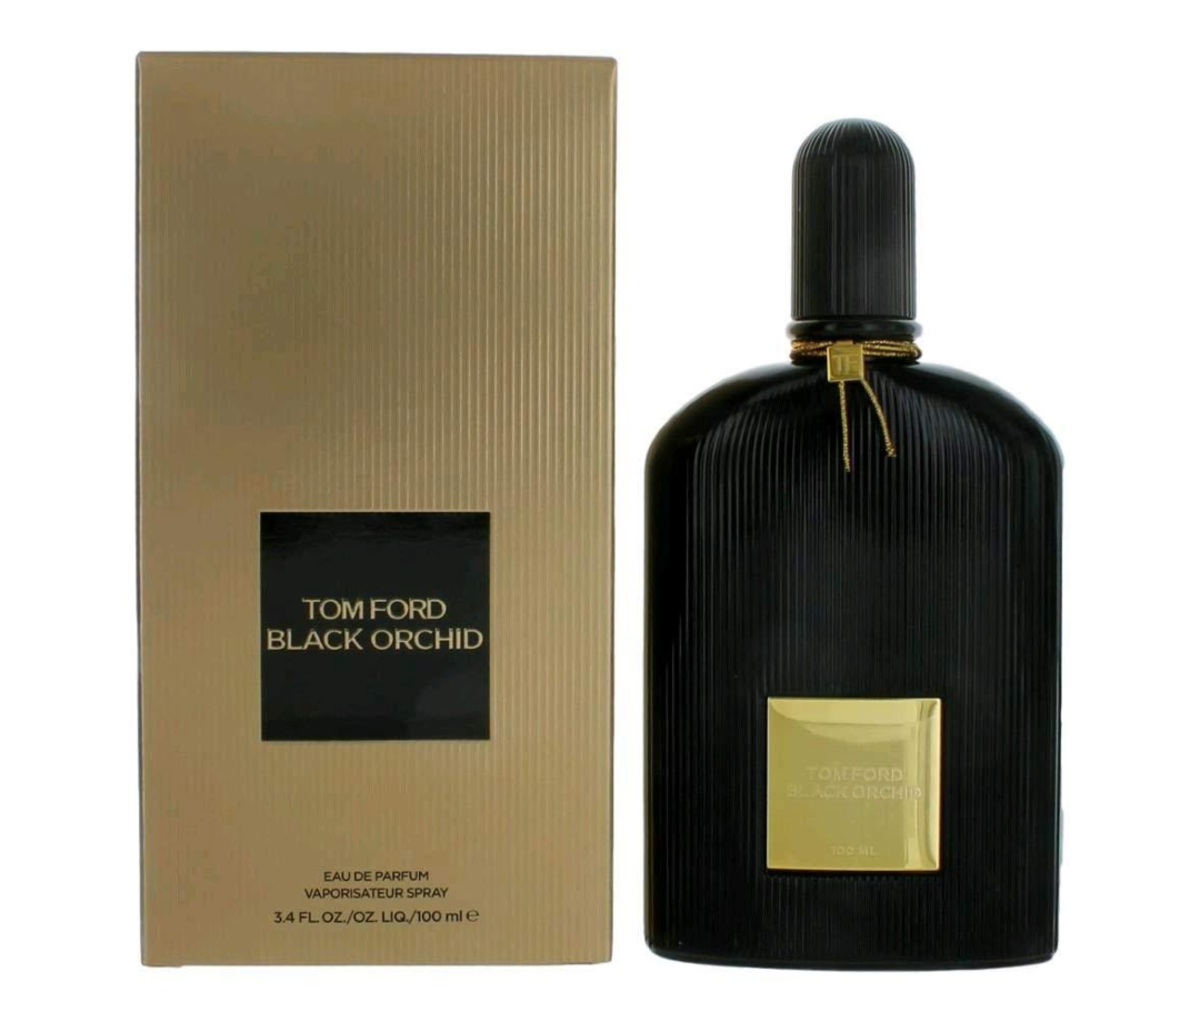 Black Orchid Cologne by Tom Ford